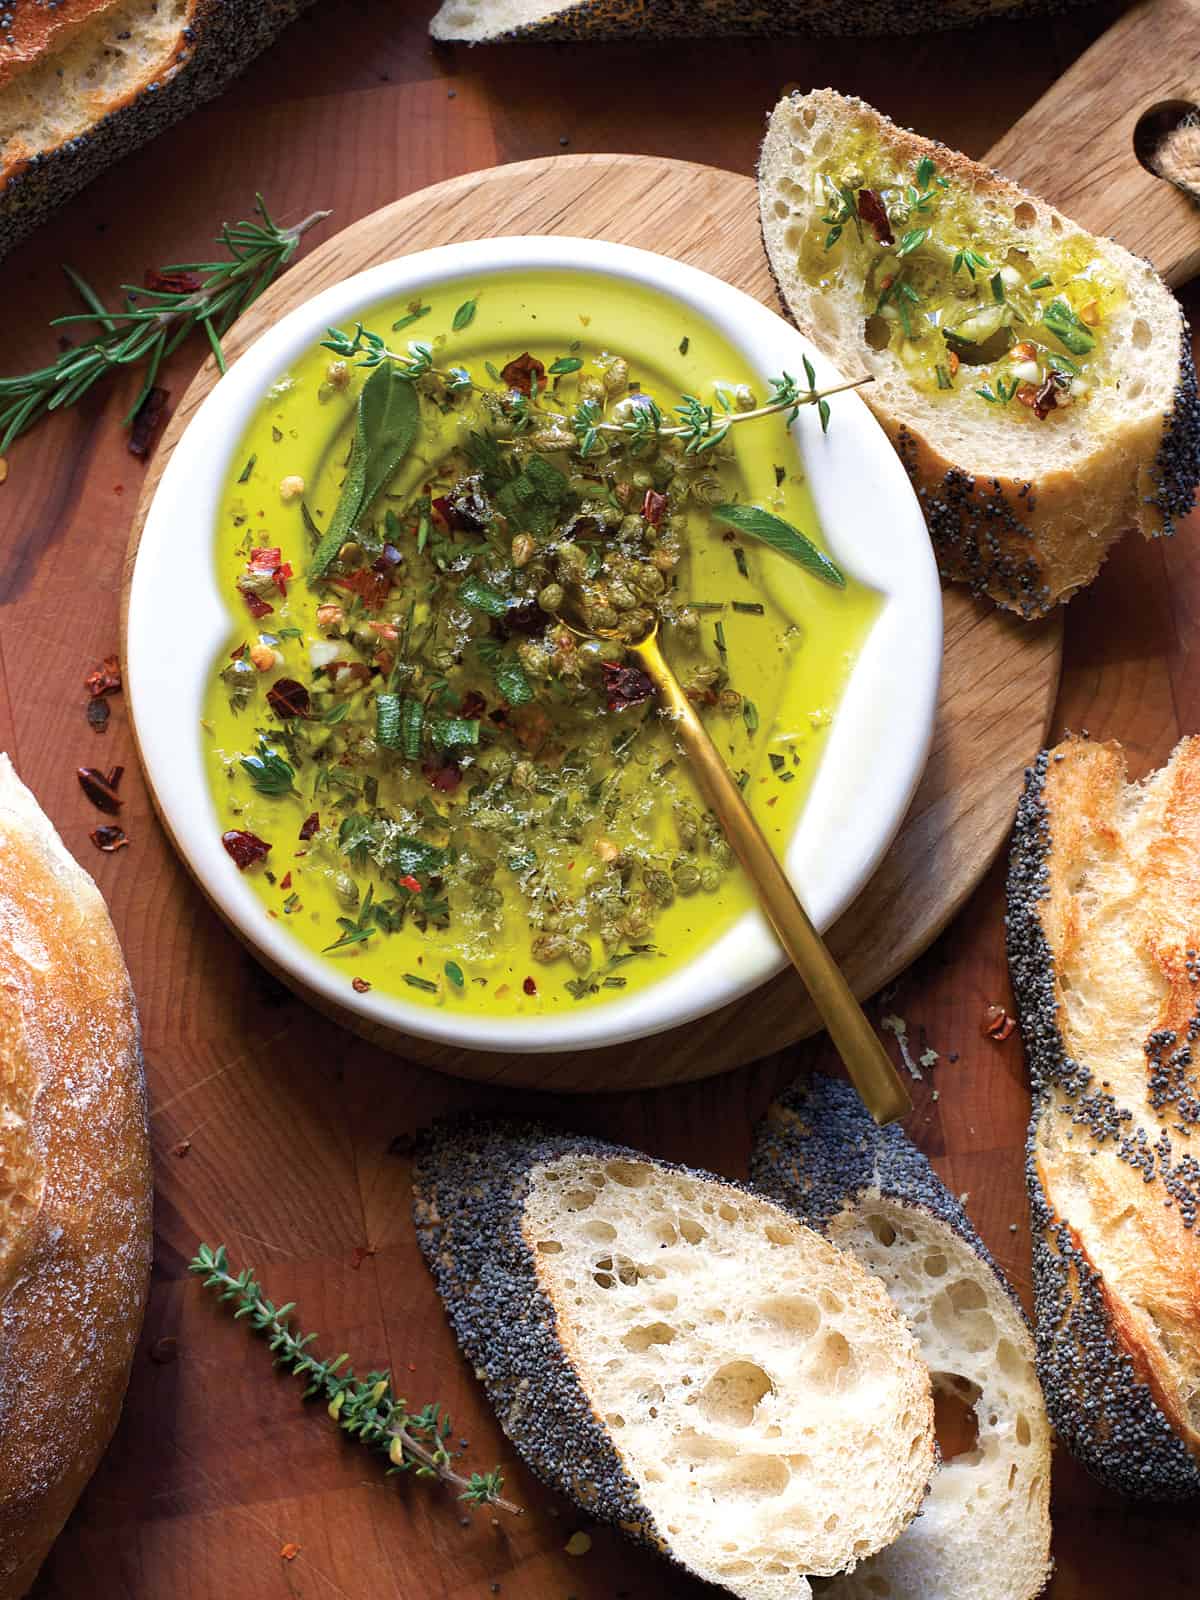 A small plate with olive oil and herbs, a gold spoon on a butcher block surrounded by pieces of bread.